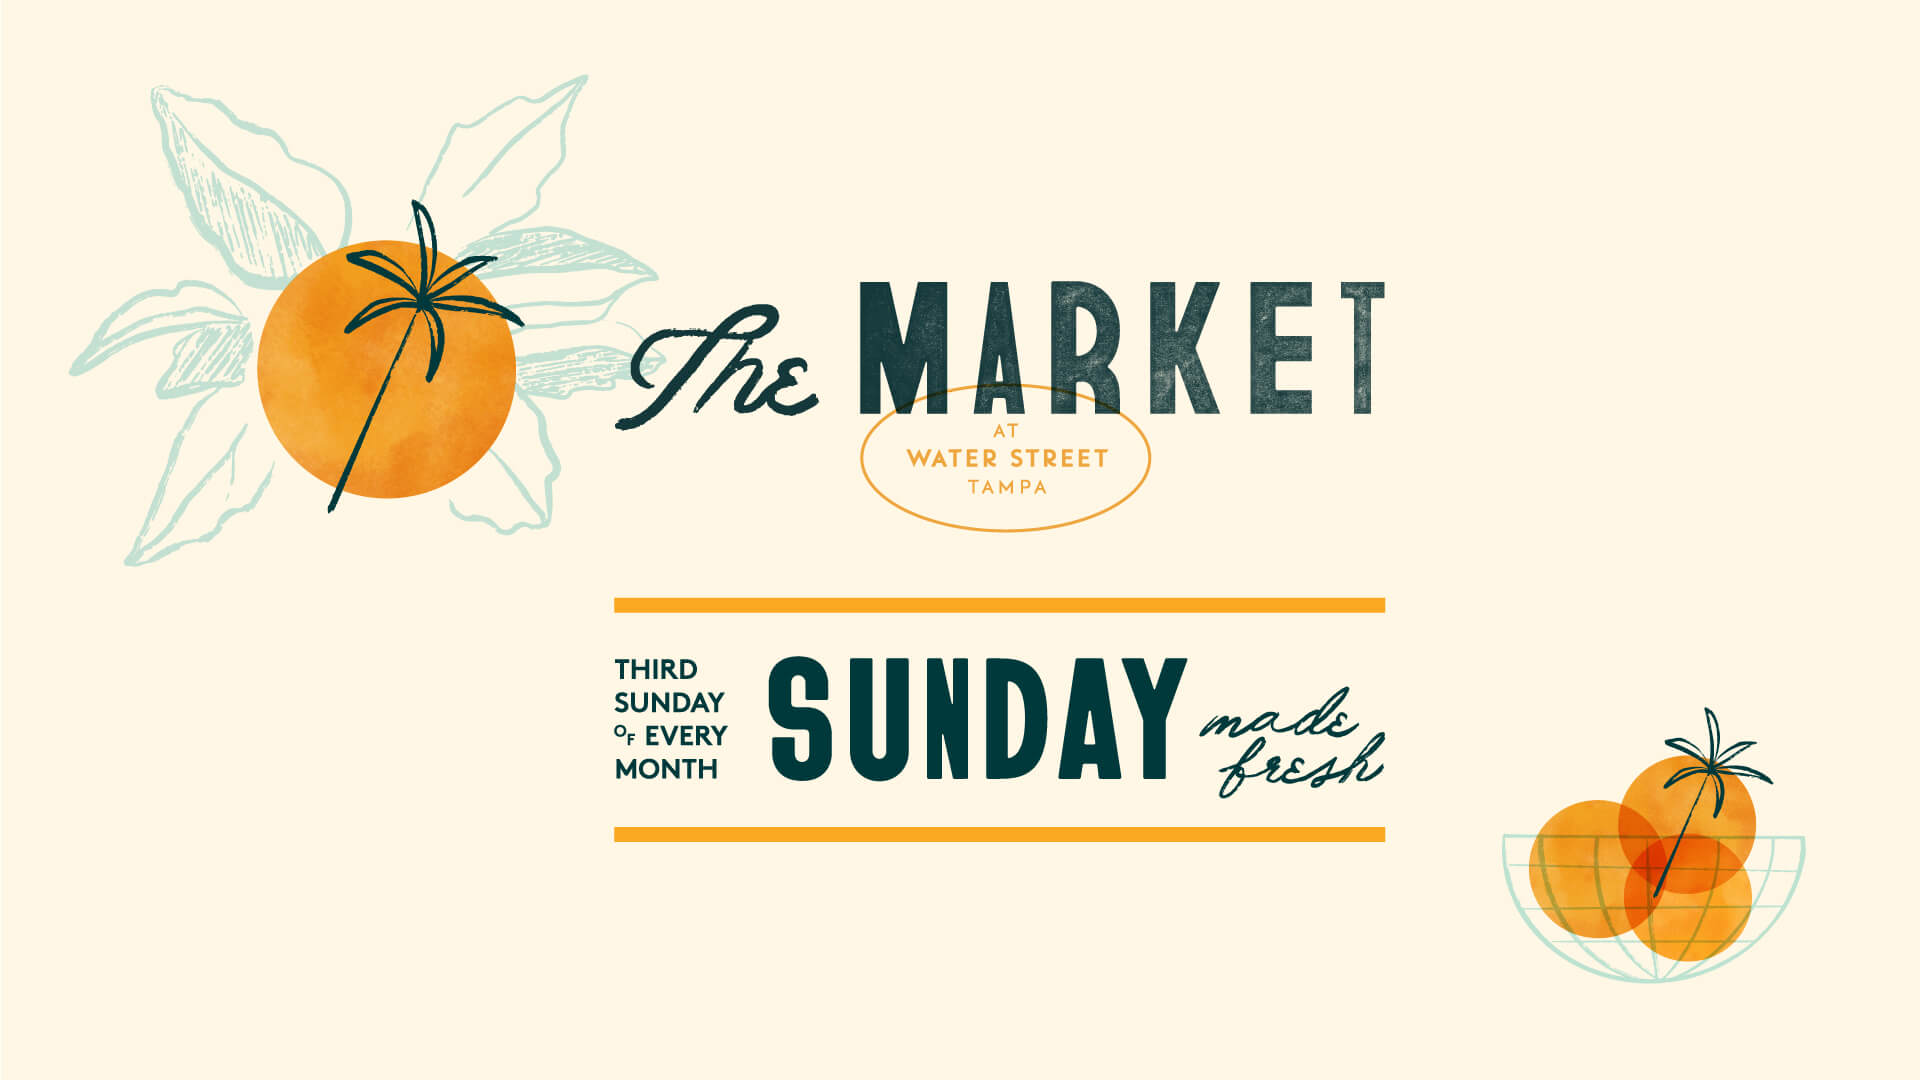 The Market at Water Street Tampa promotional graphic